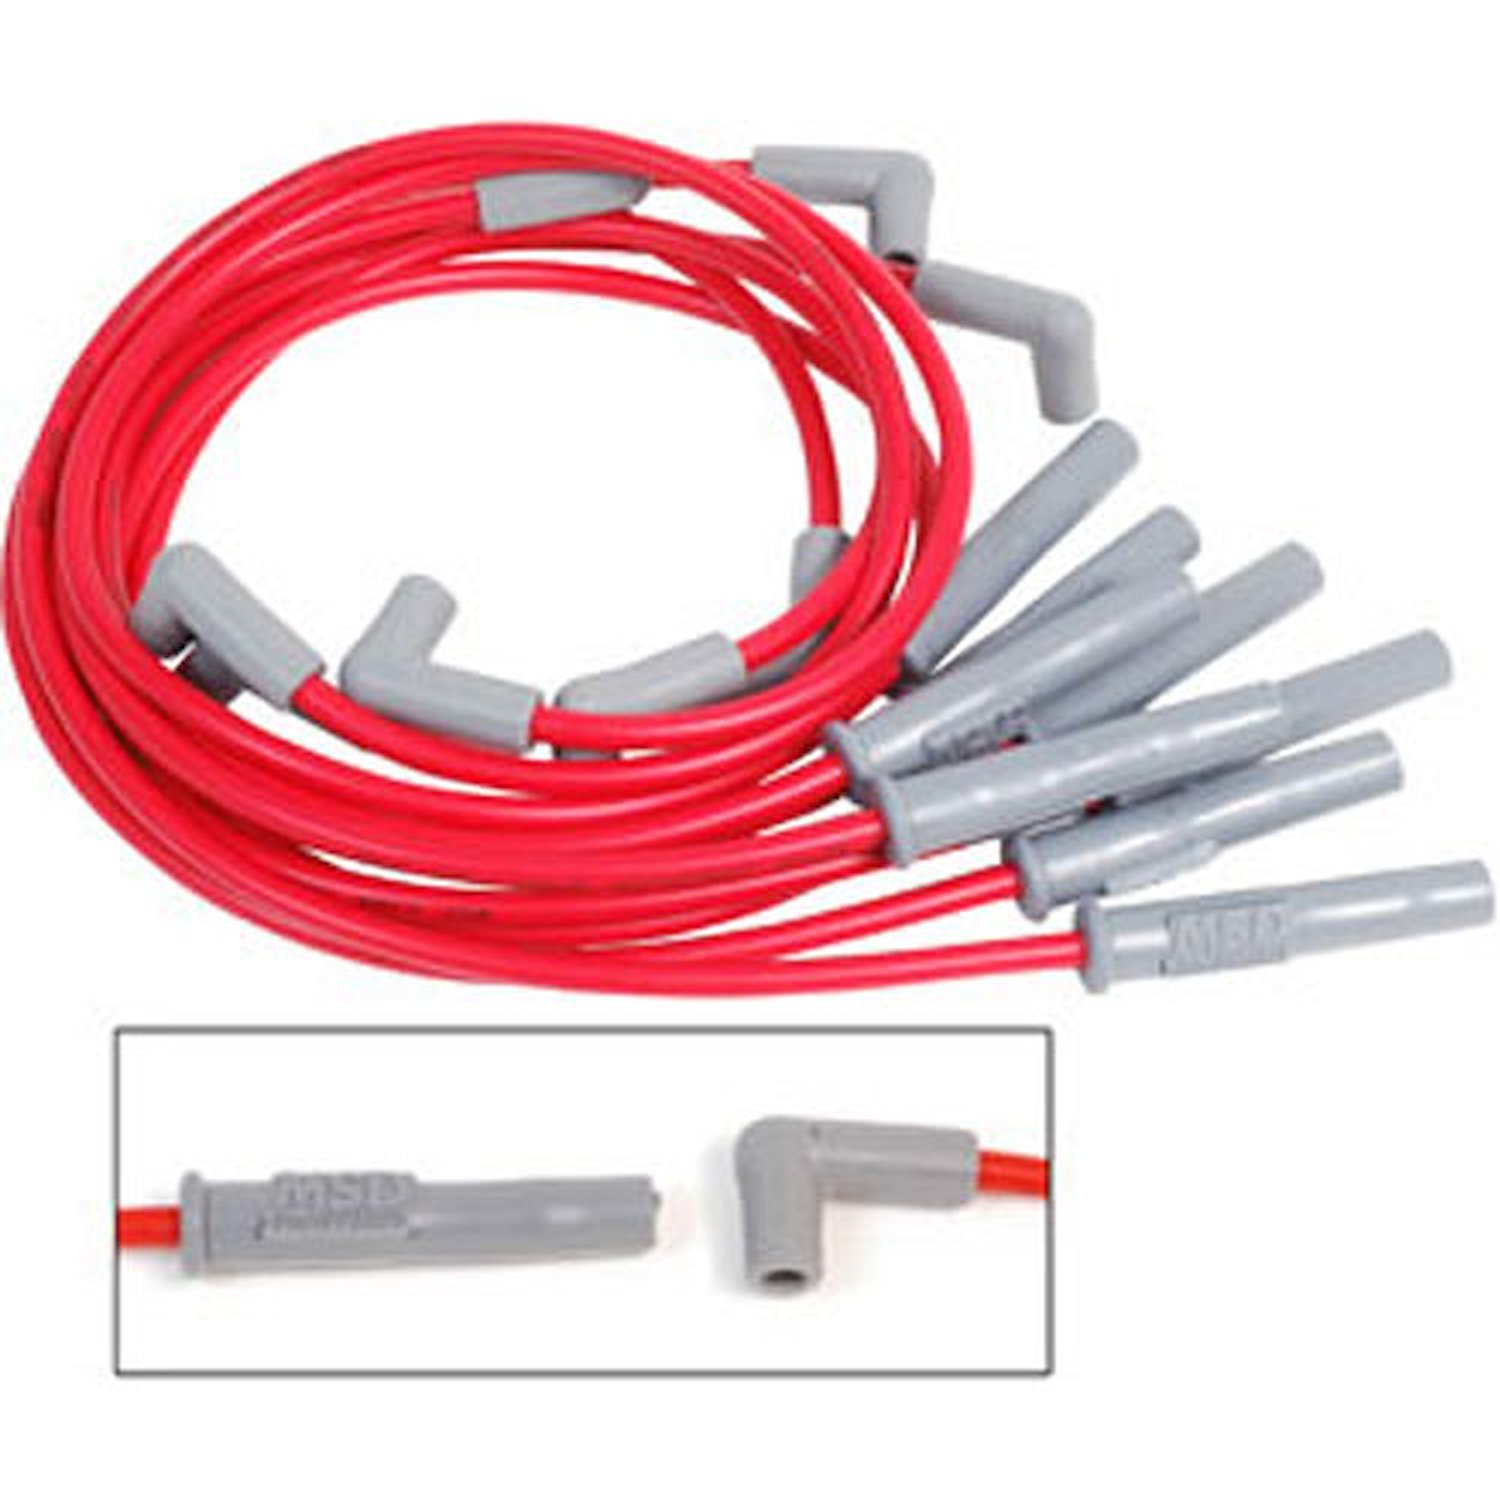 Super Conductor 8.5mm Wires Red